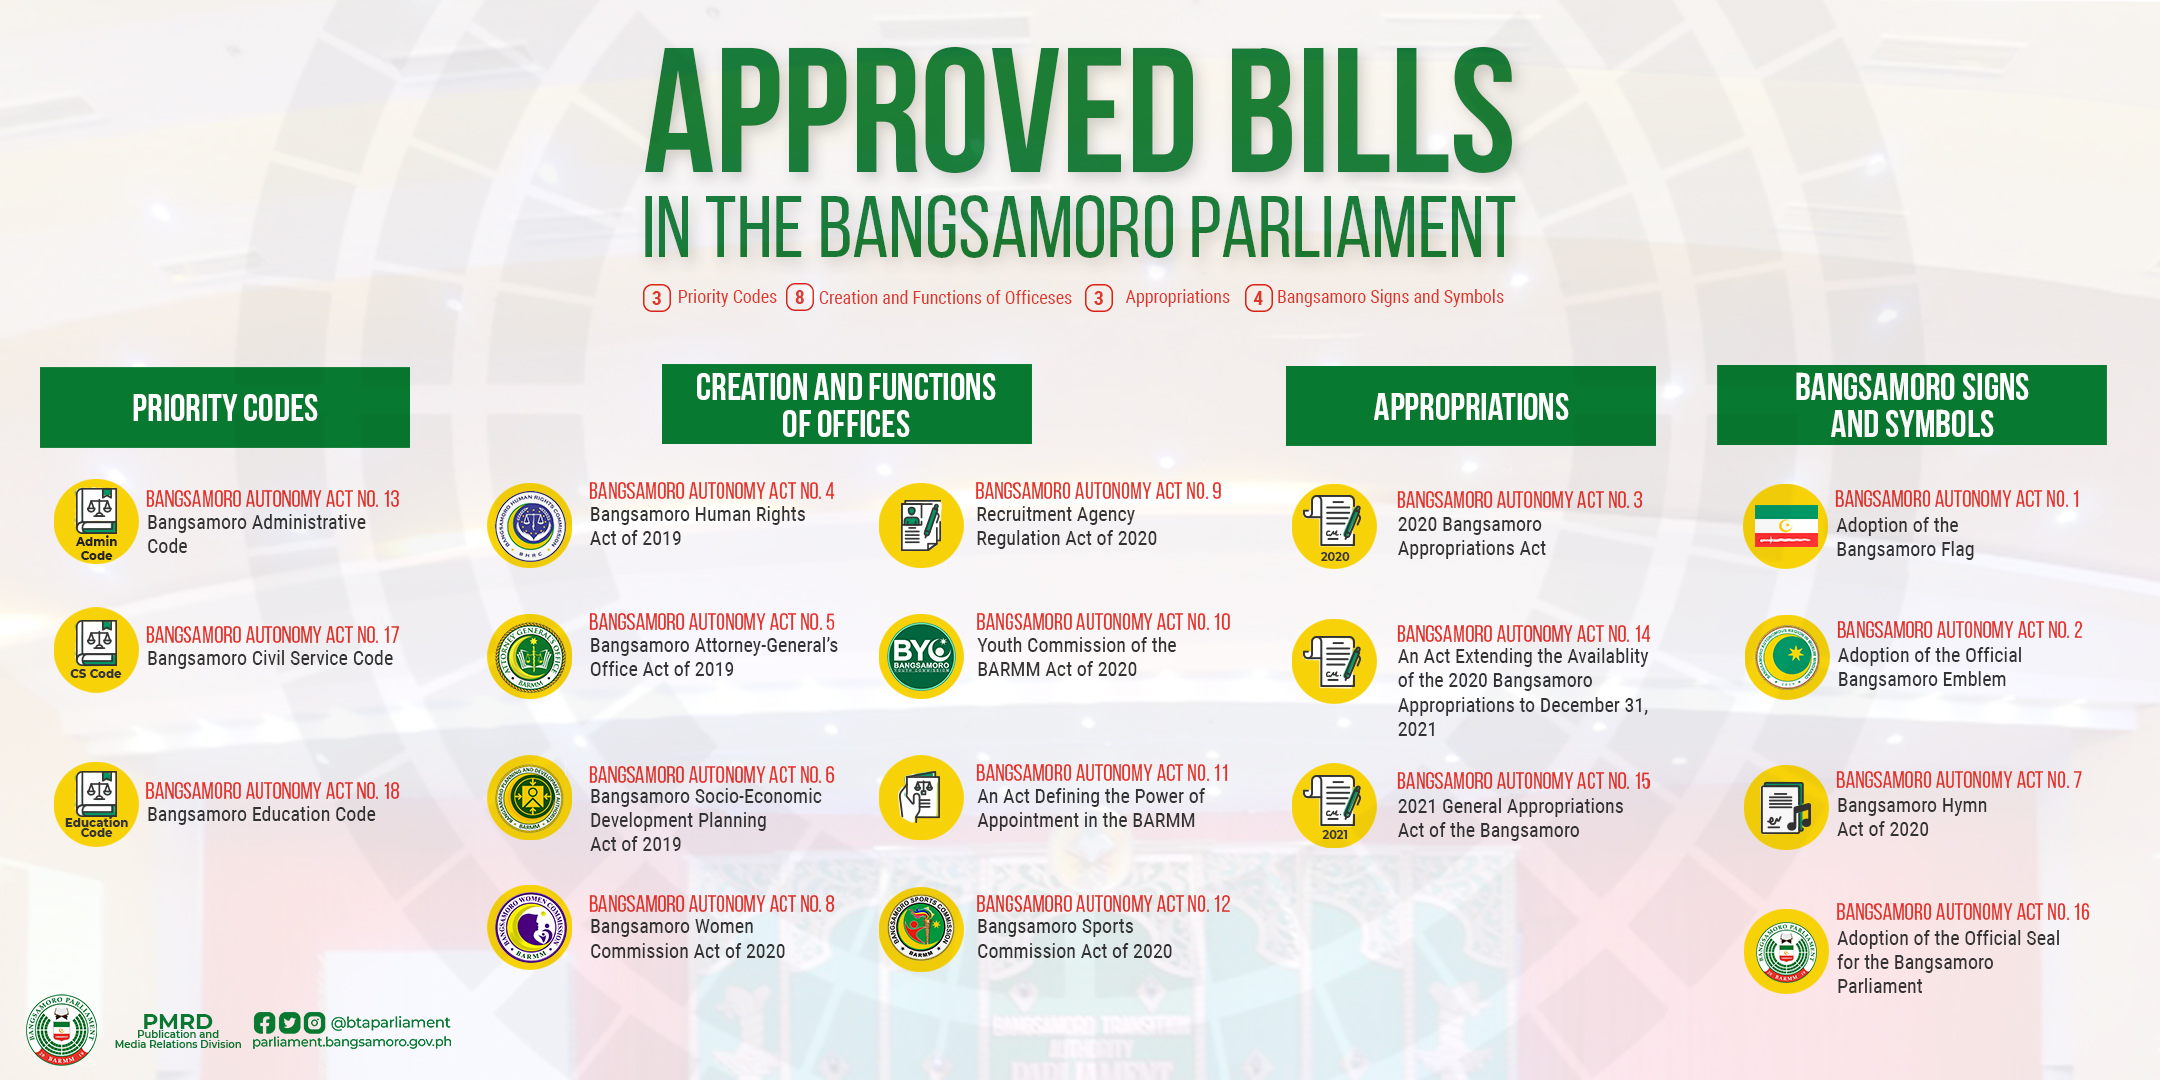 Bills approved by the Bangsamoro Parliament since its creation in 2019